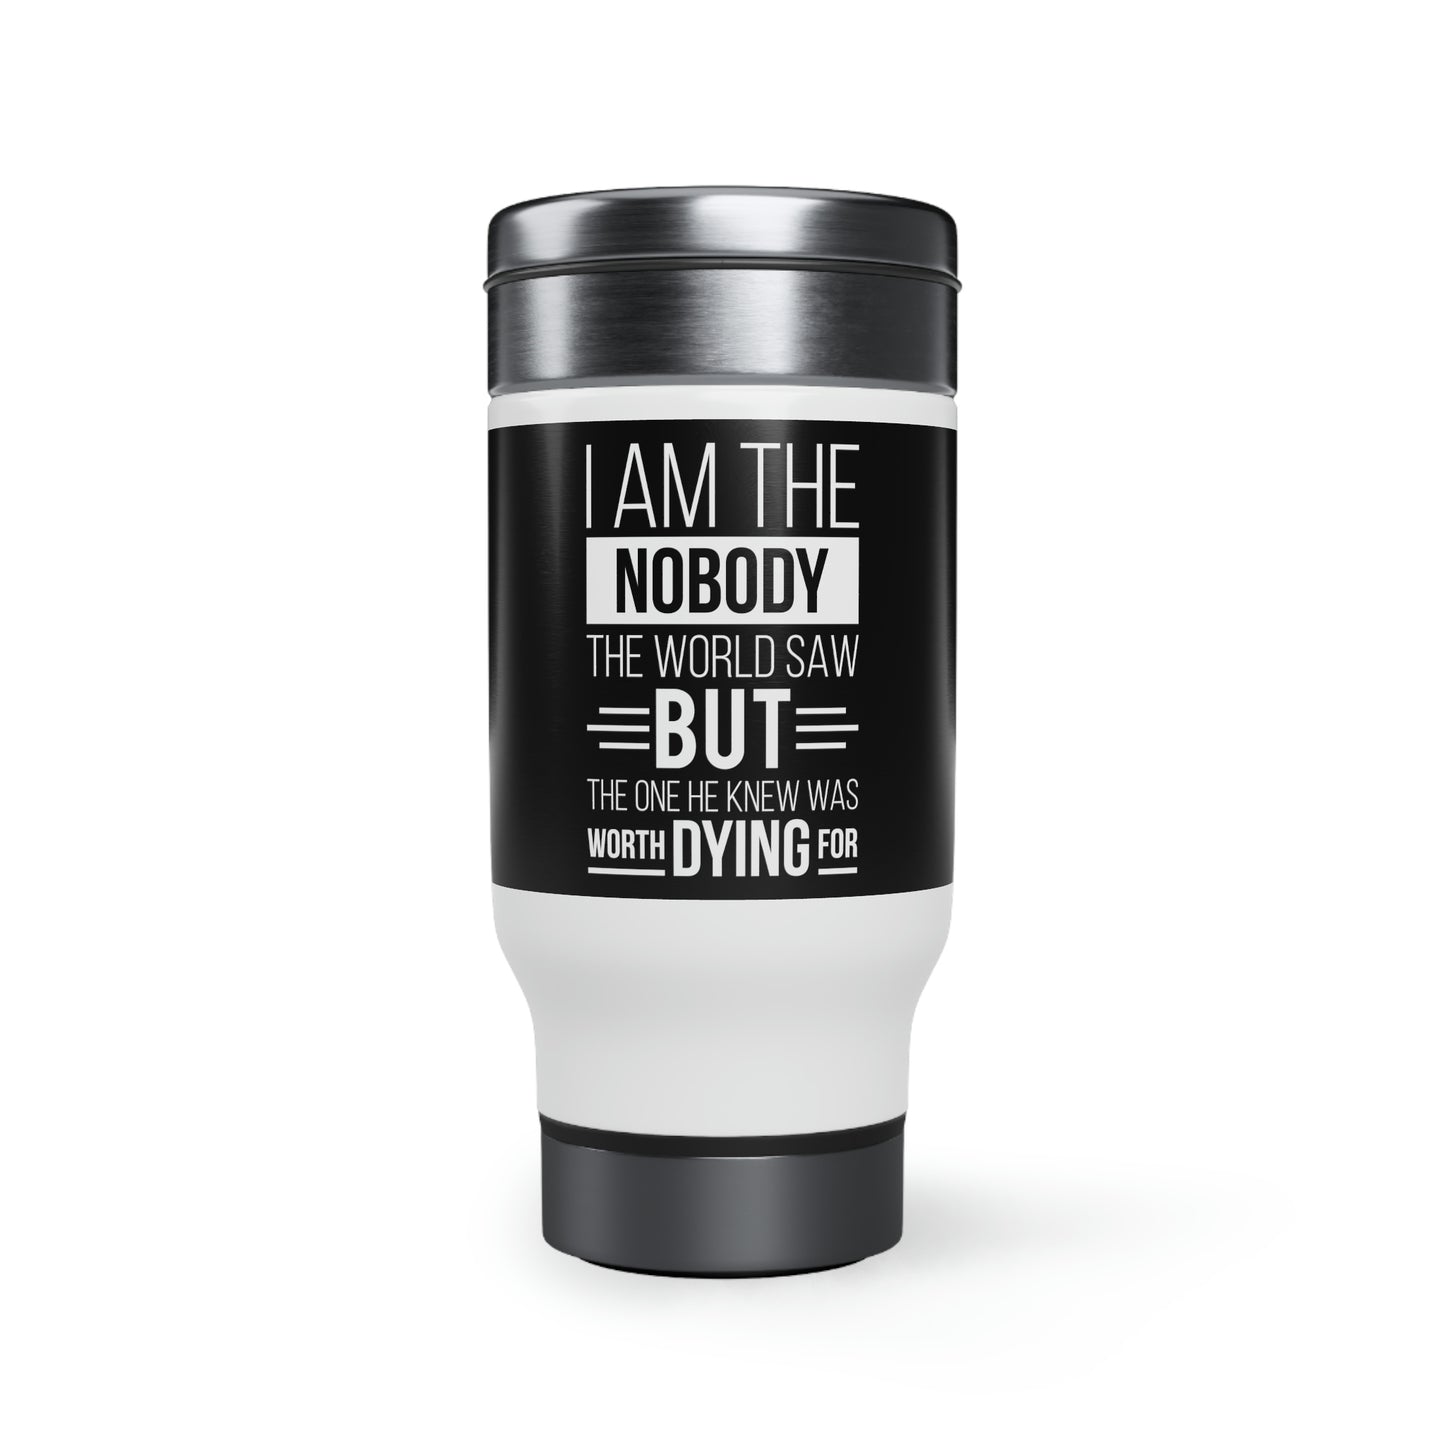 I Am The Nobody The World Saw But The One He Knew Was Worth Dying For Stainless Steel Travel Mug with Handle, 14oz